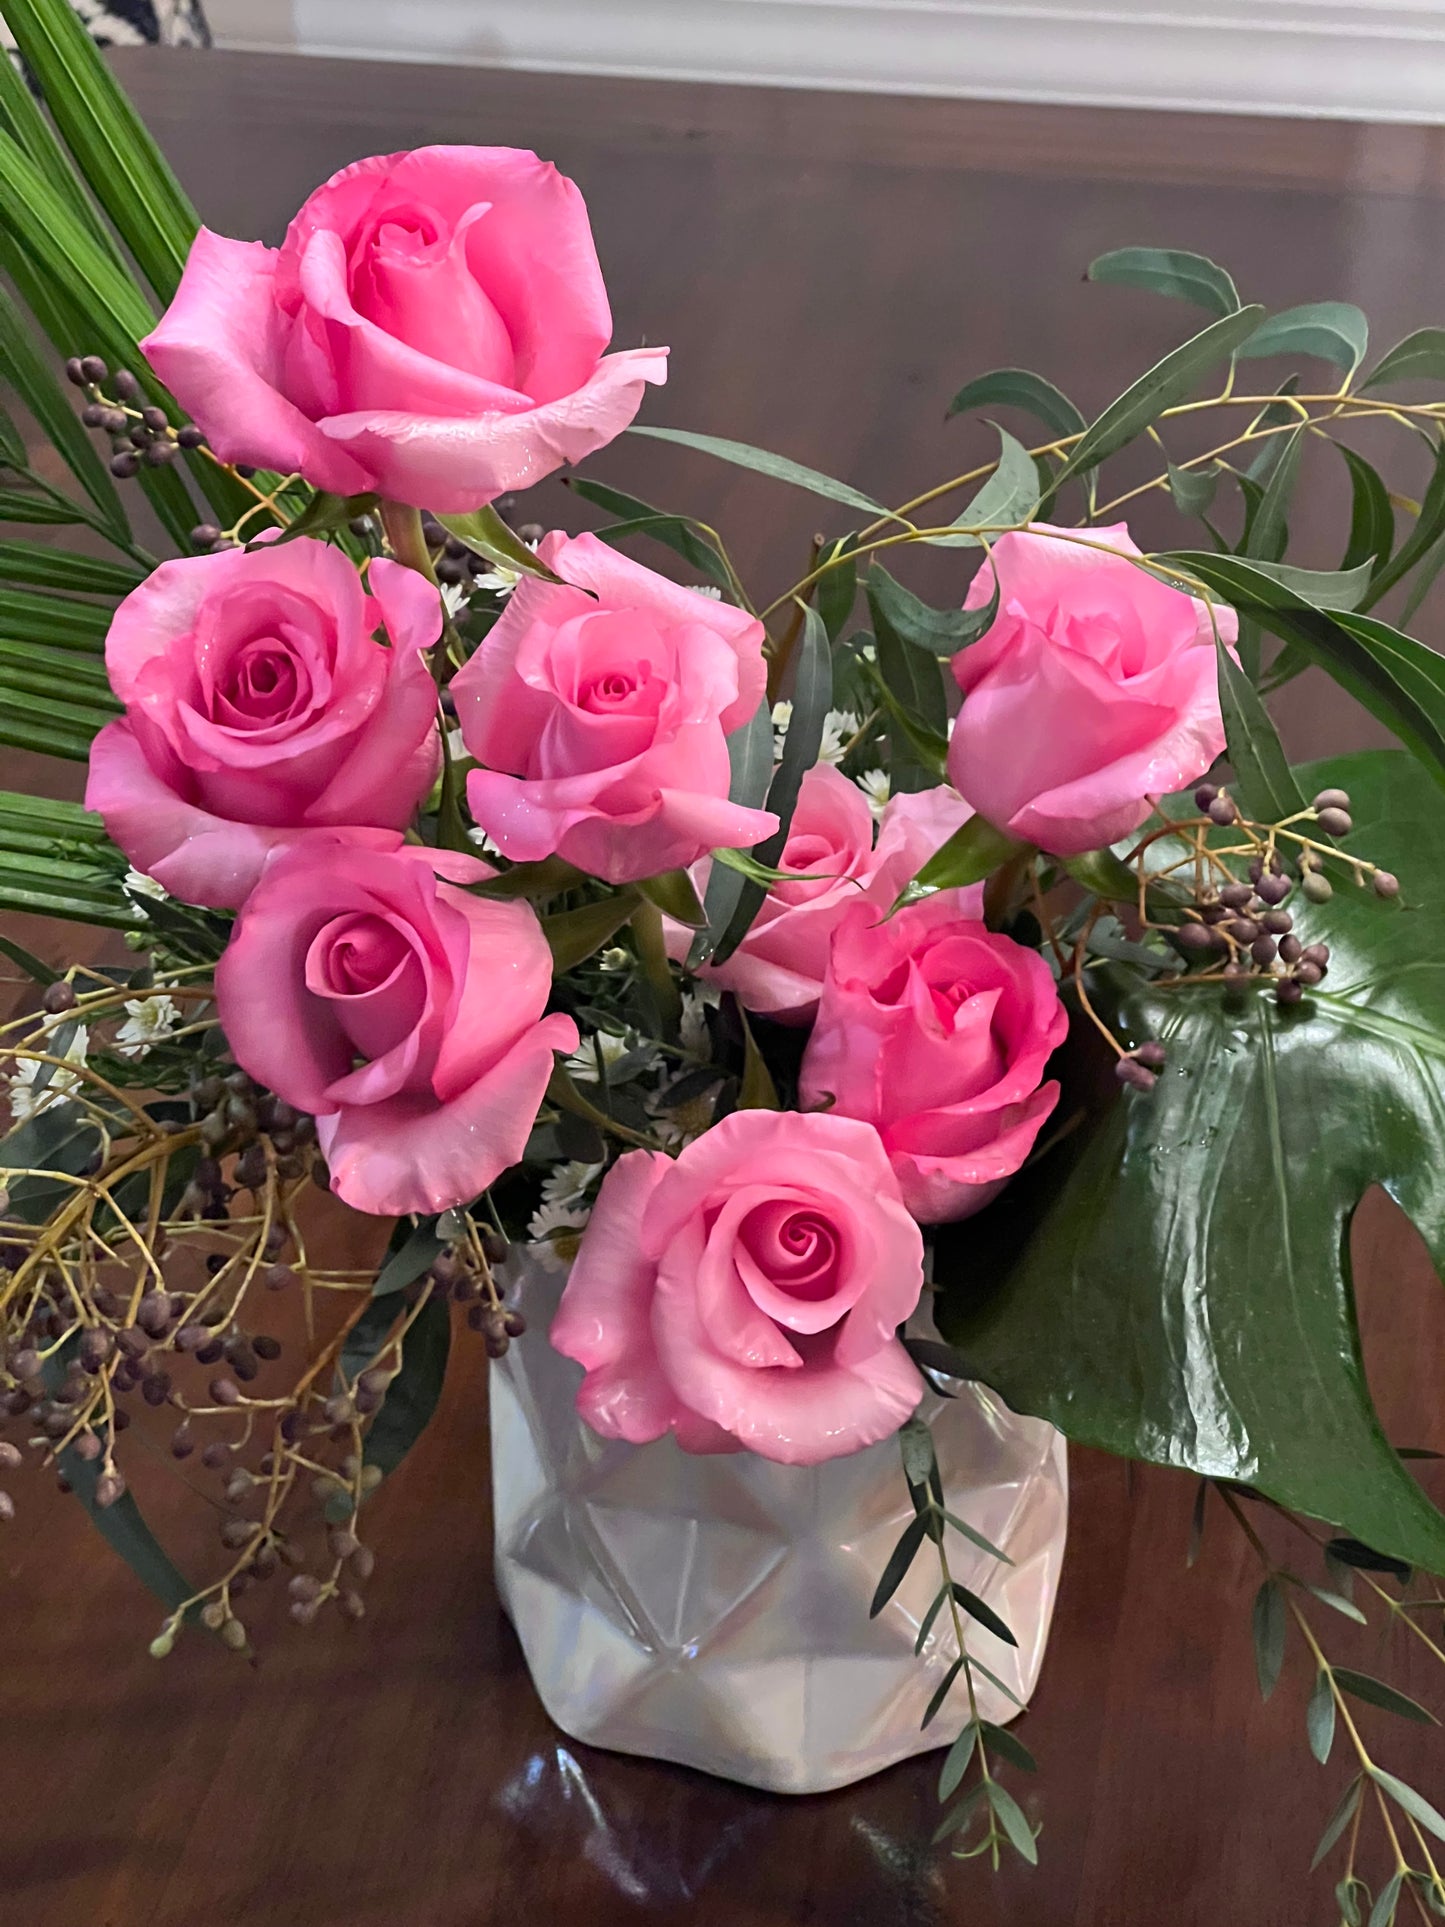 Pink roses with tropicals make the perfect arrangement for office or home.